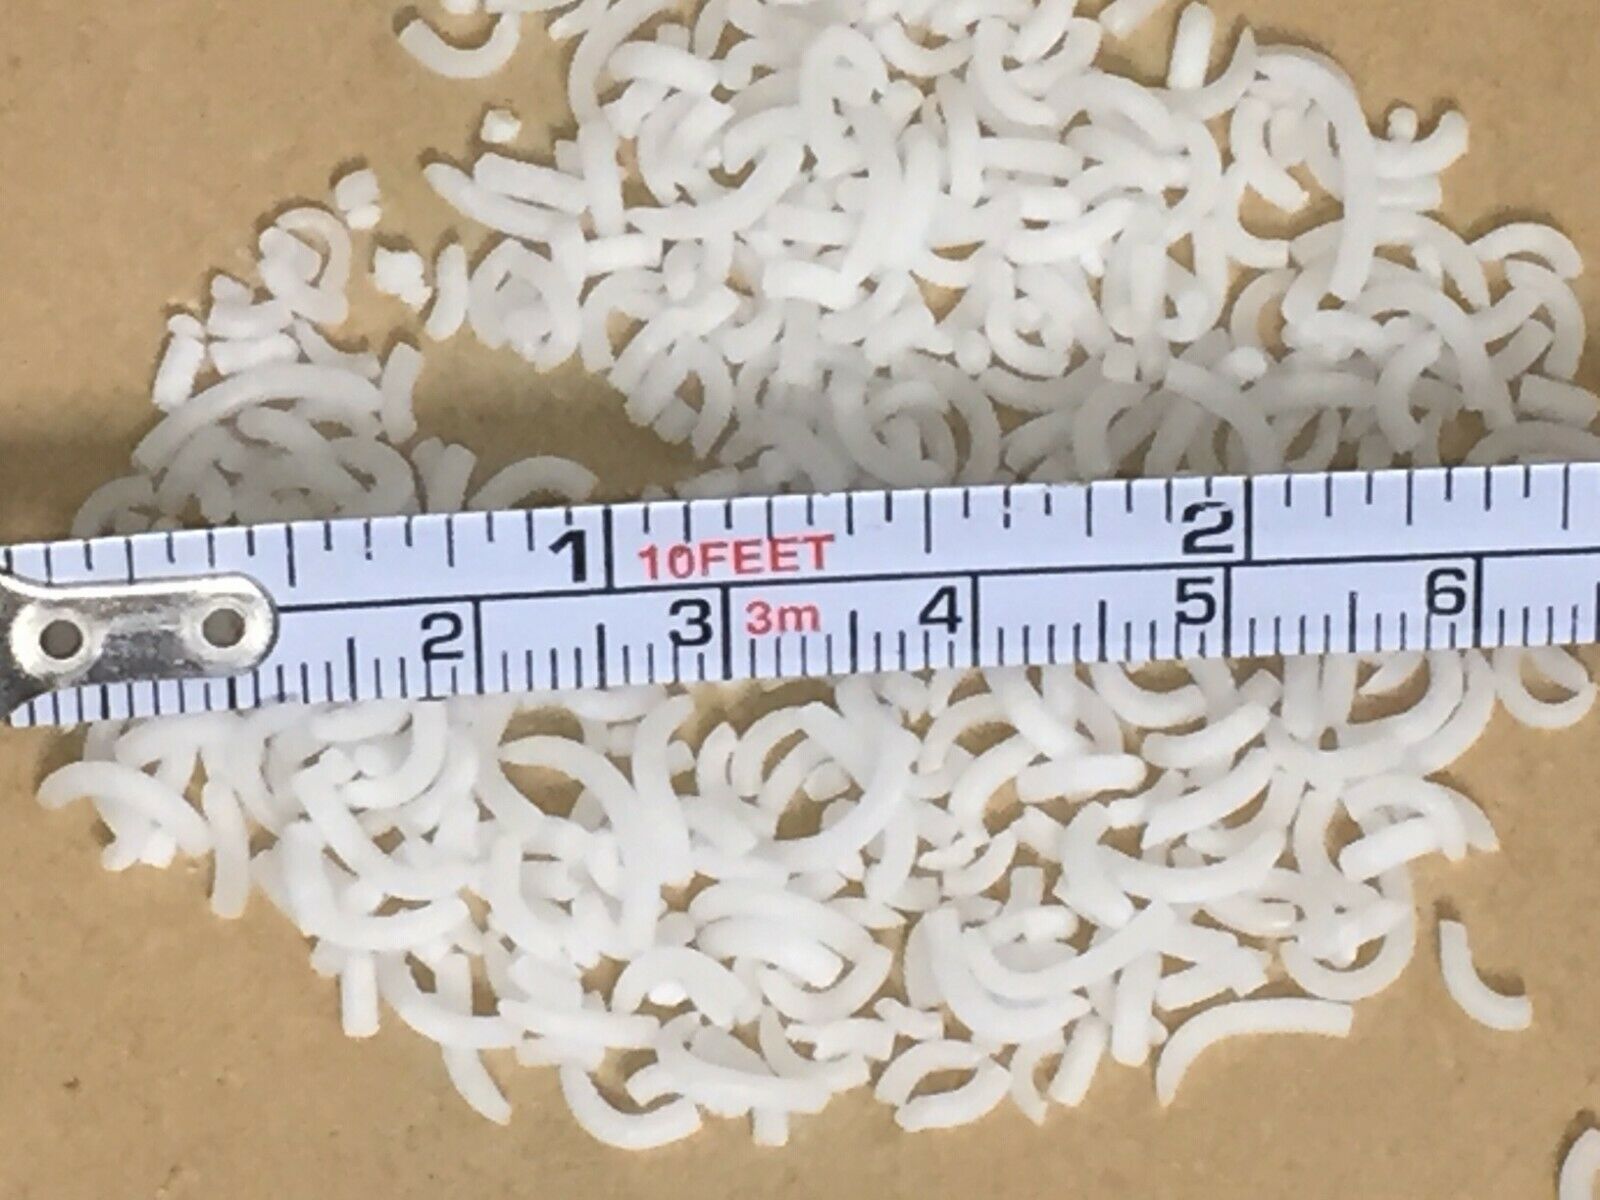 Sodium Cocoyl Isethionate (SCI) - Very Small Noodles (4 lbs)